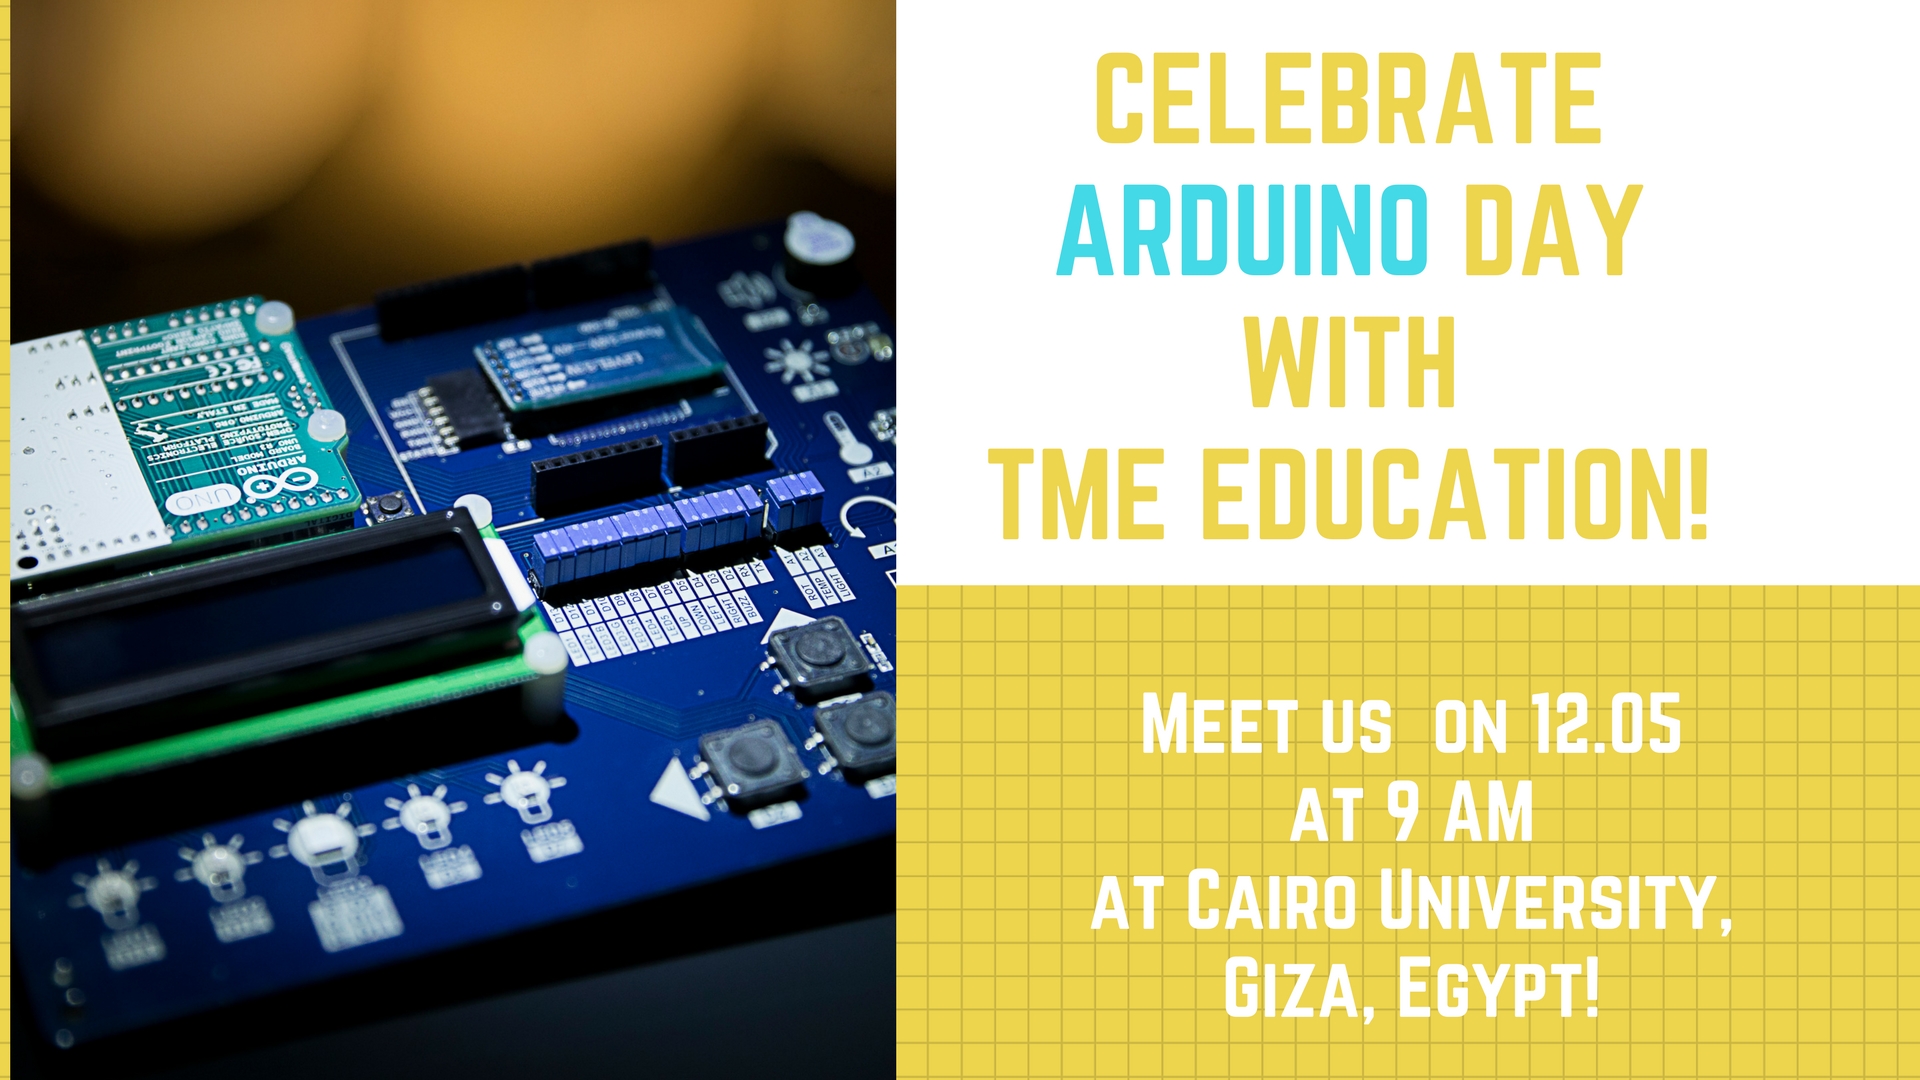 Arduino birthday! Let's celebrate it together in Egypt!